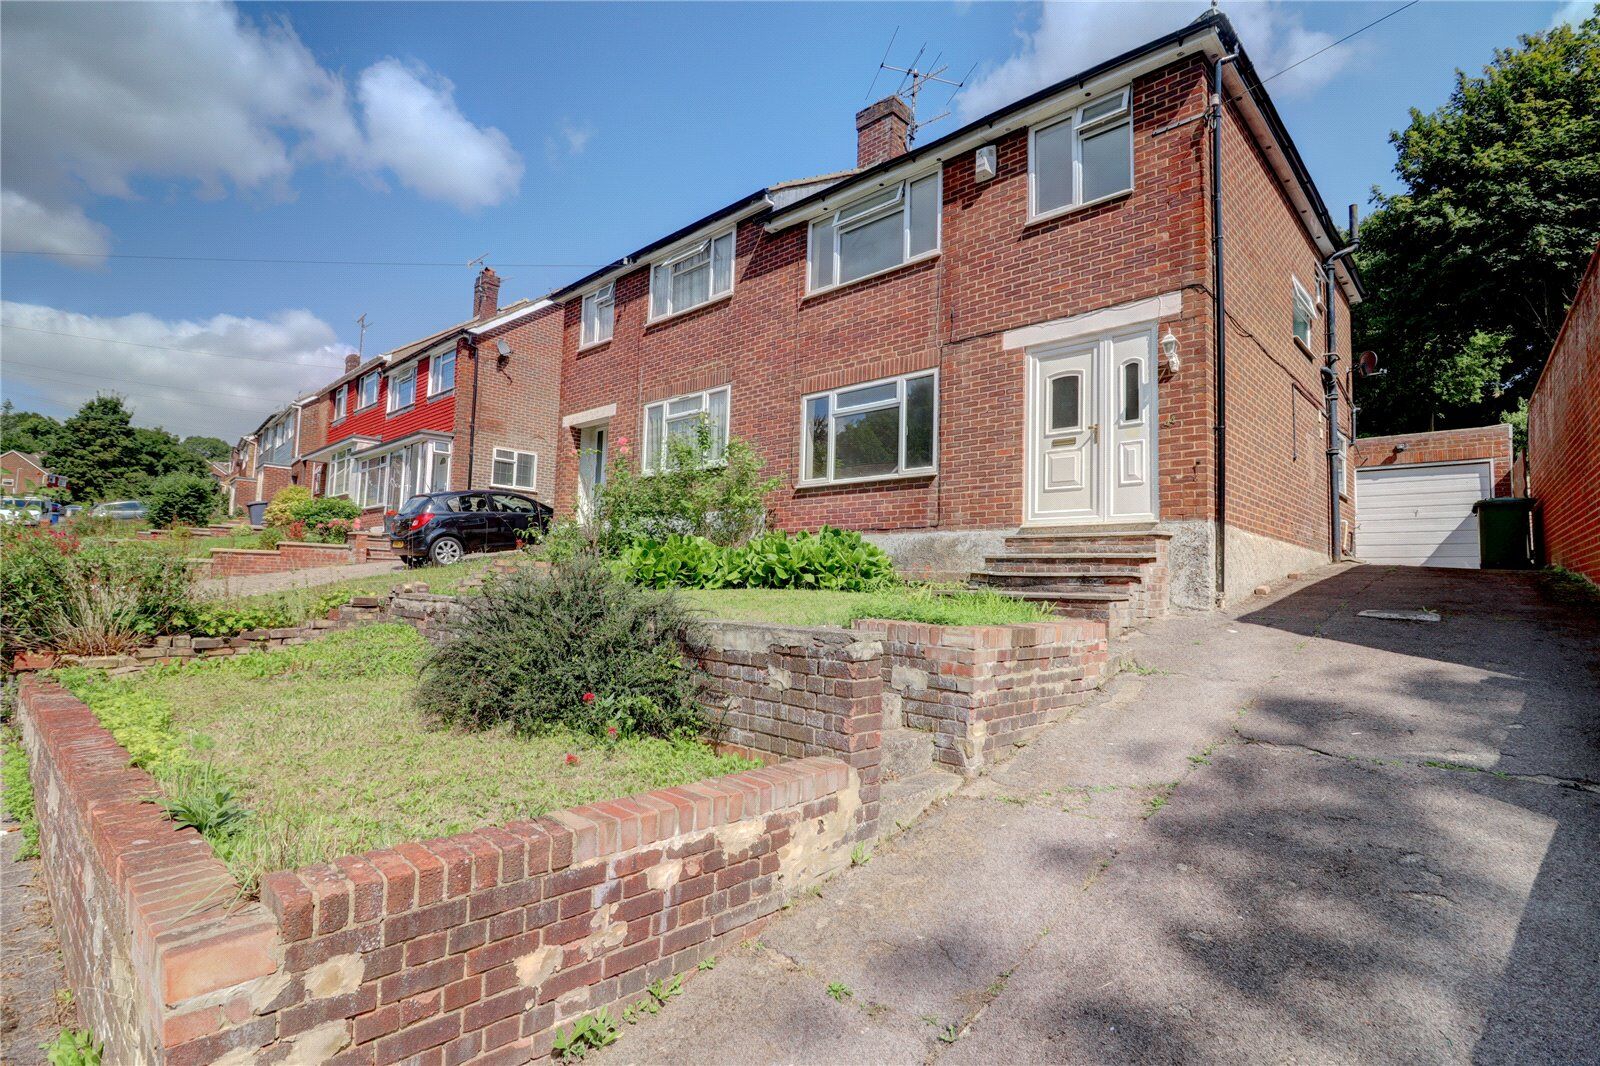 3 bedroom semi detached house for sale Arnison Avenue, High Wycombe, HP13, main image